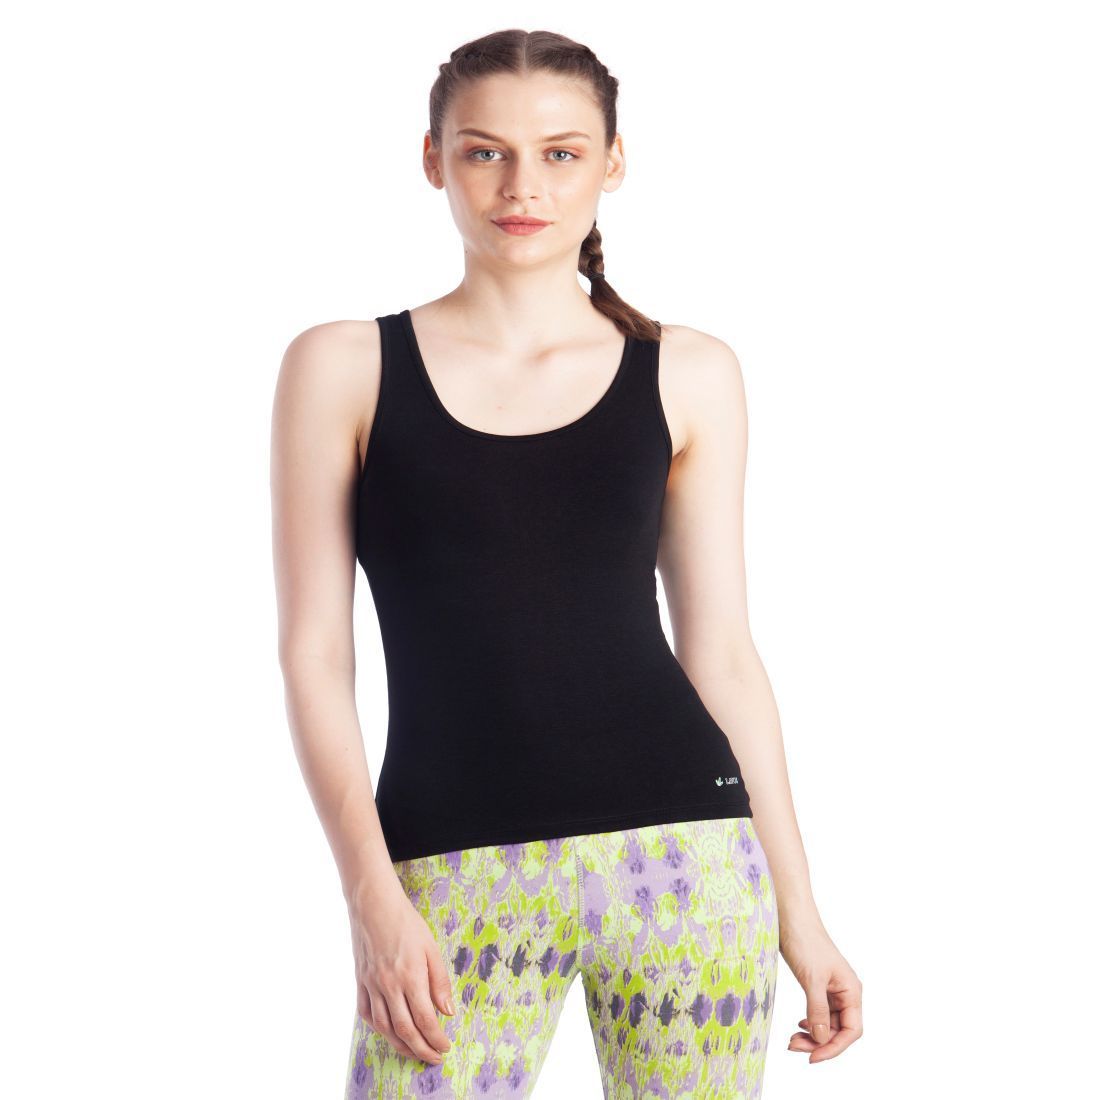 Buy Tank Top For Women Online in India - Lavos Performance